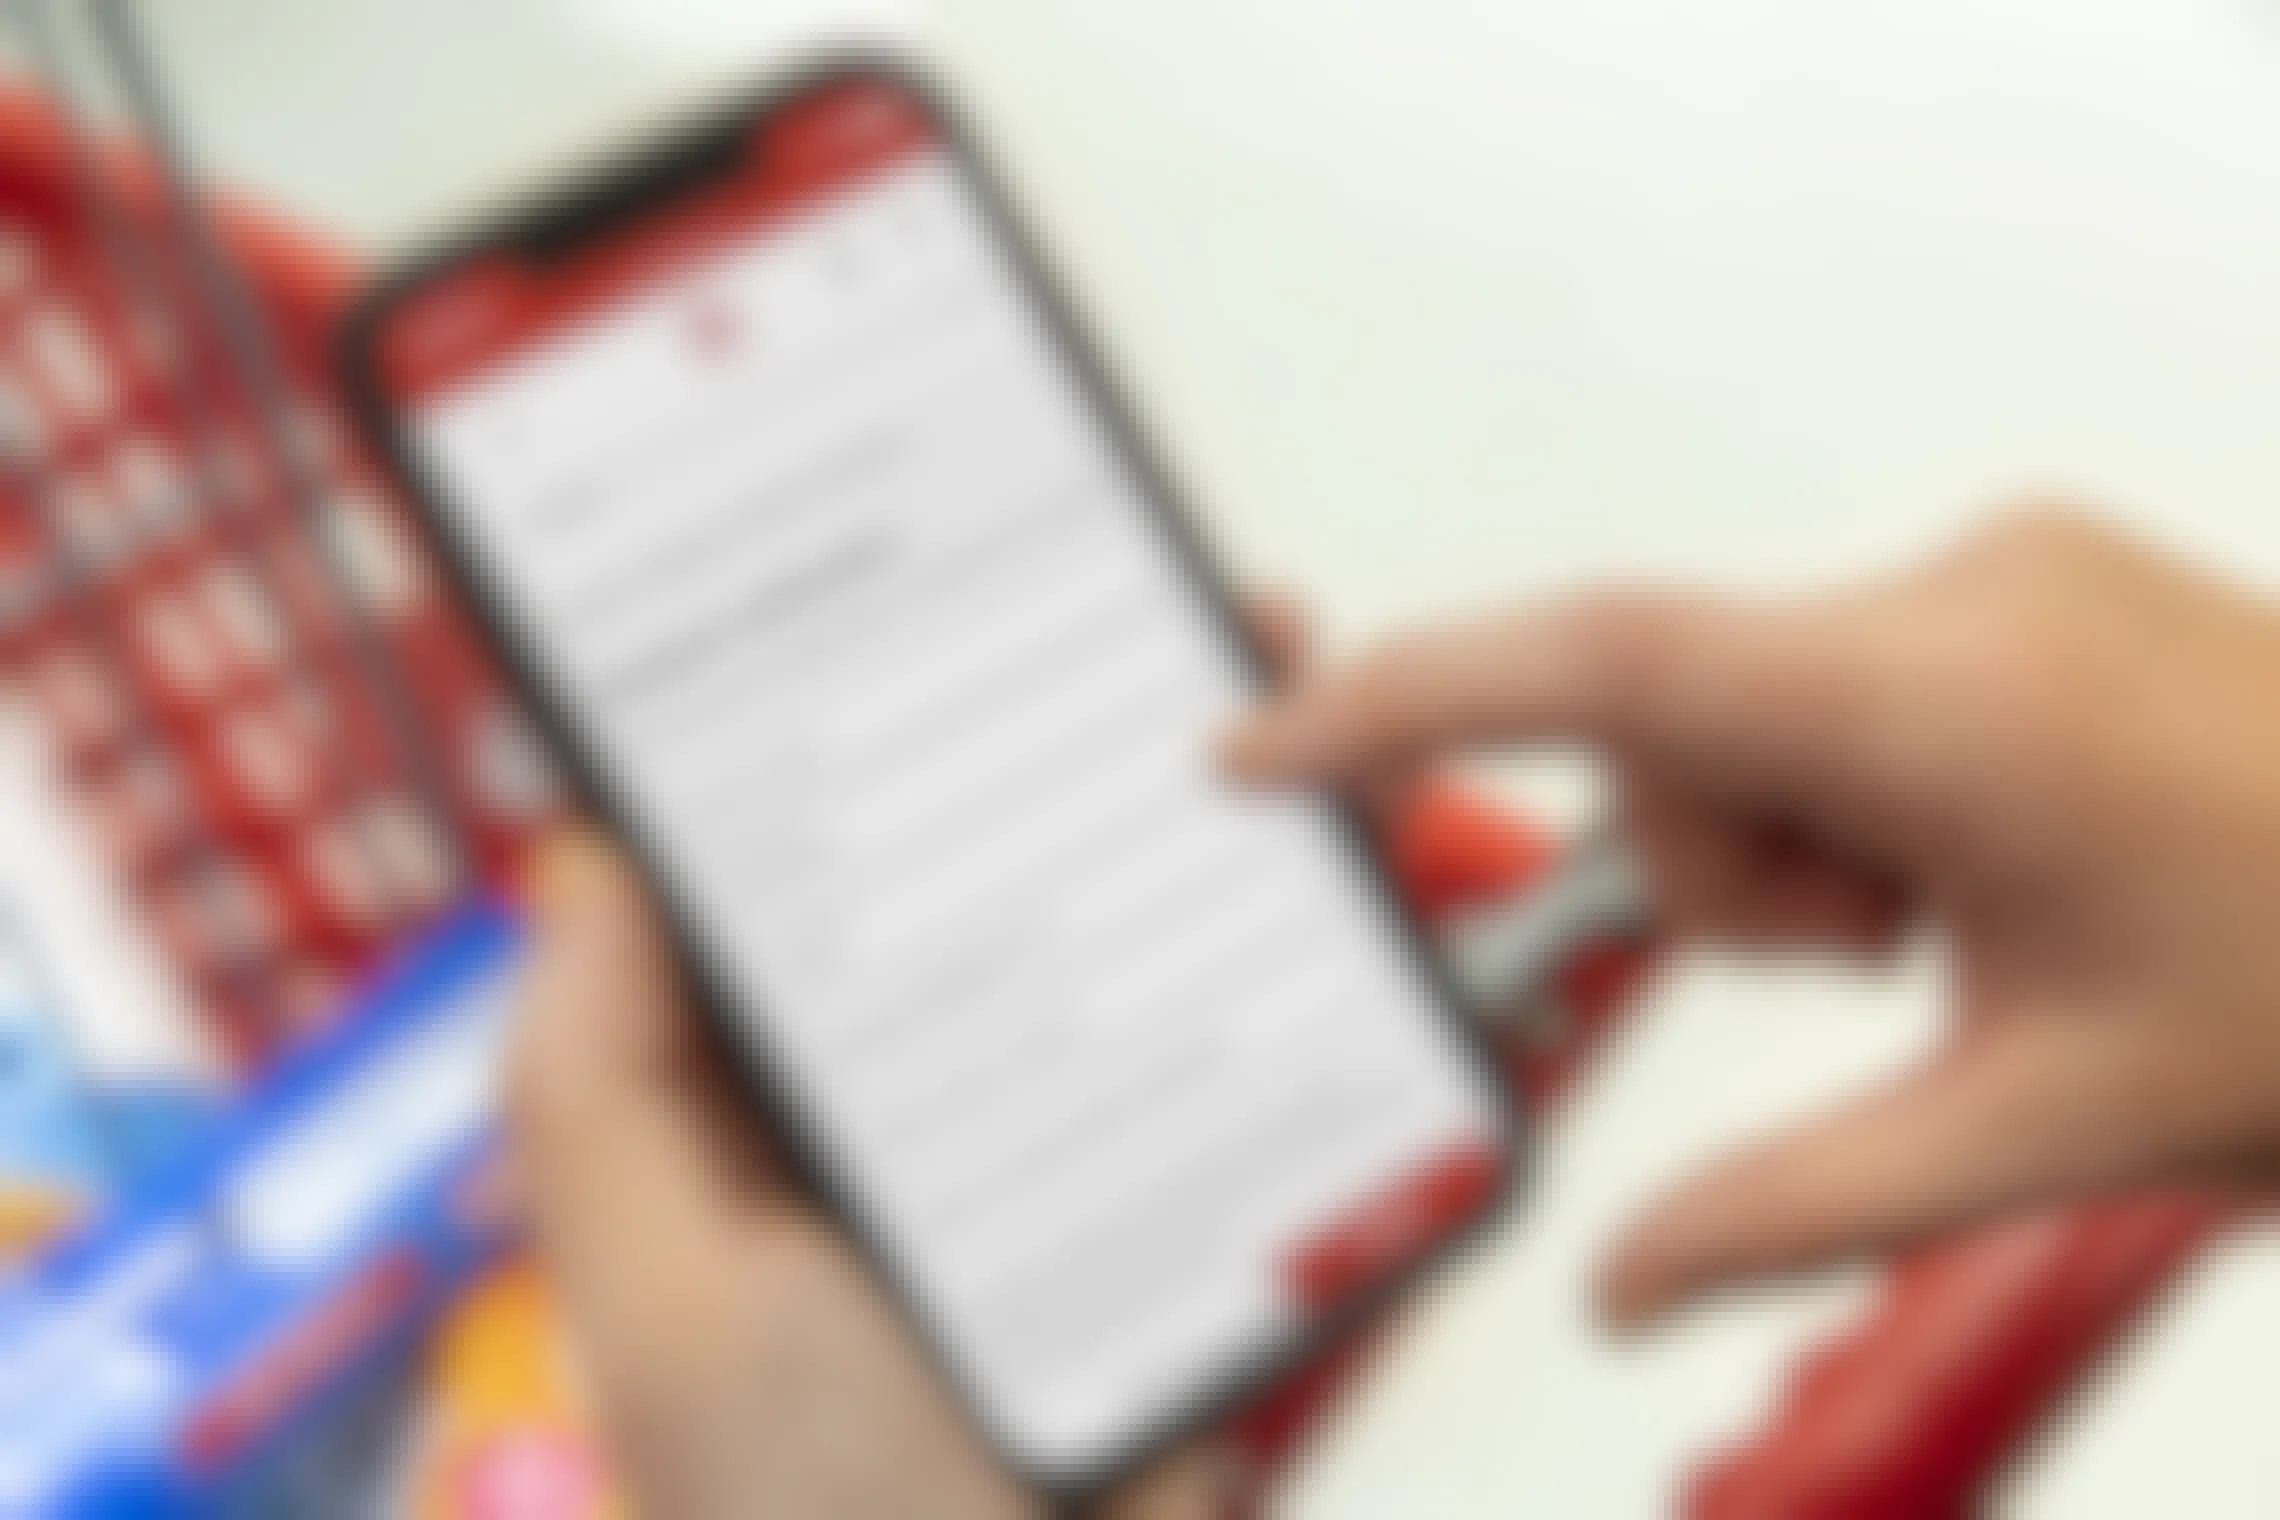 A person shopping in Target, filling out the Student Verification form on their phone in the Target Circle app.